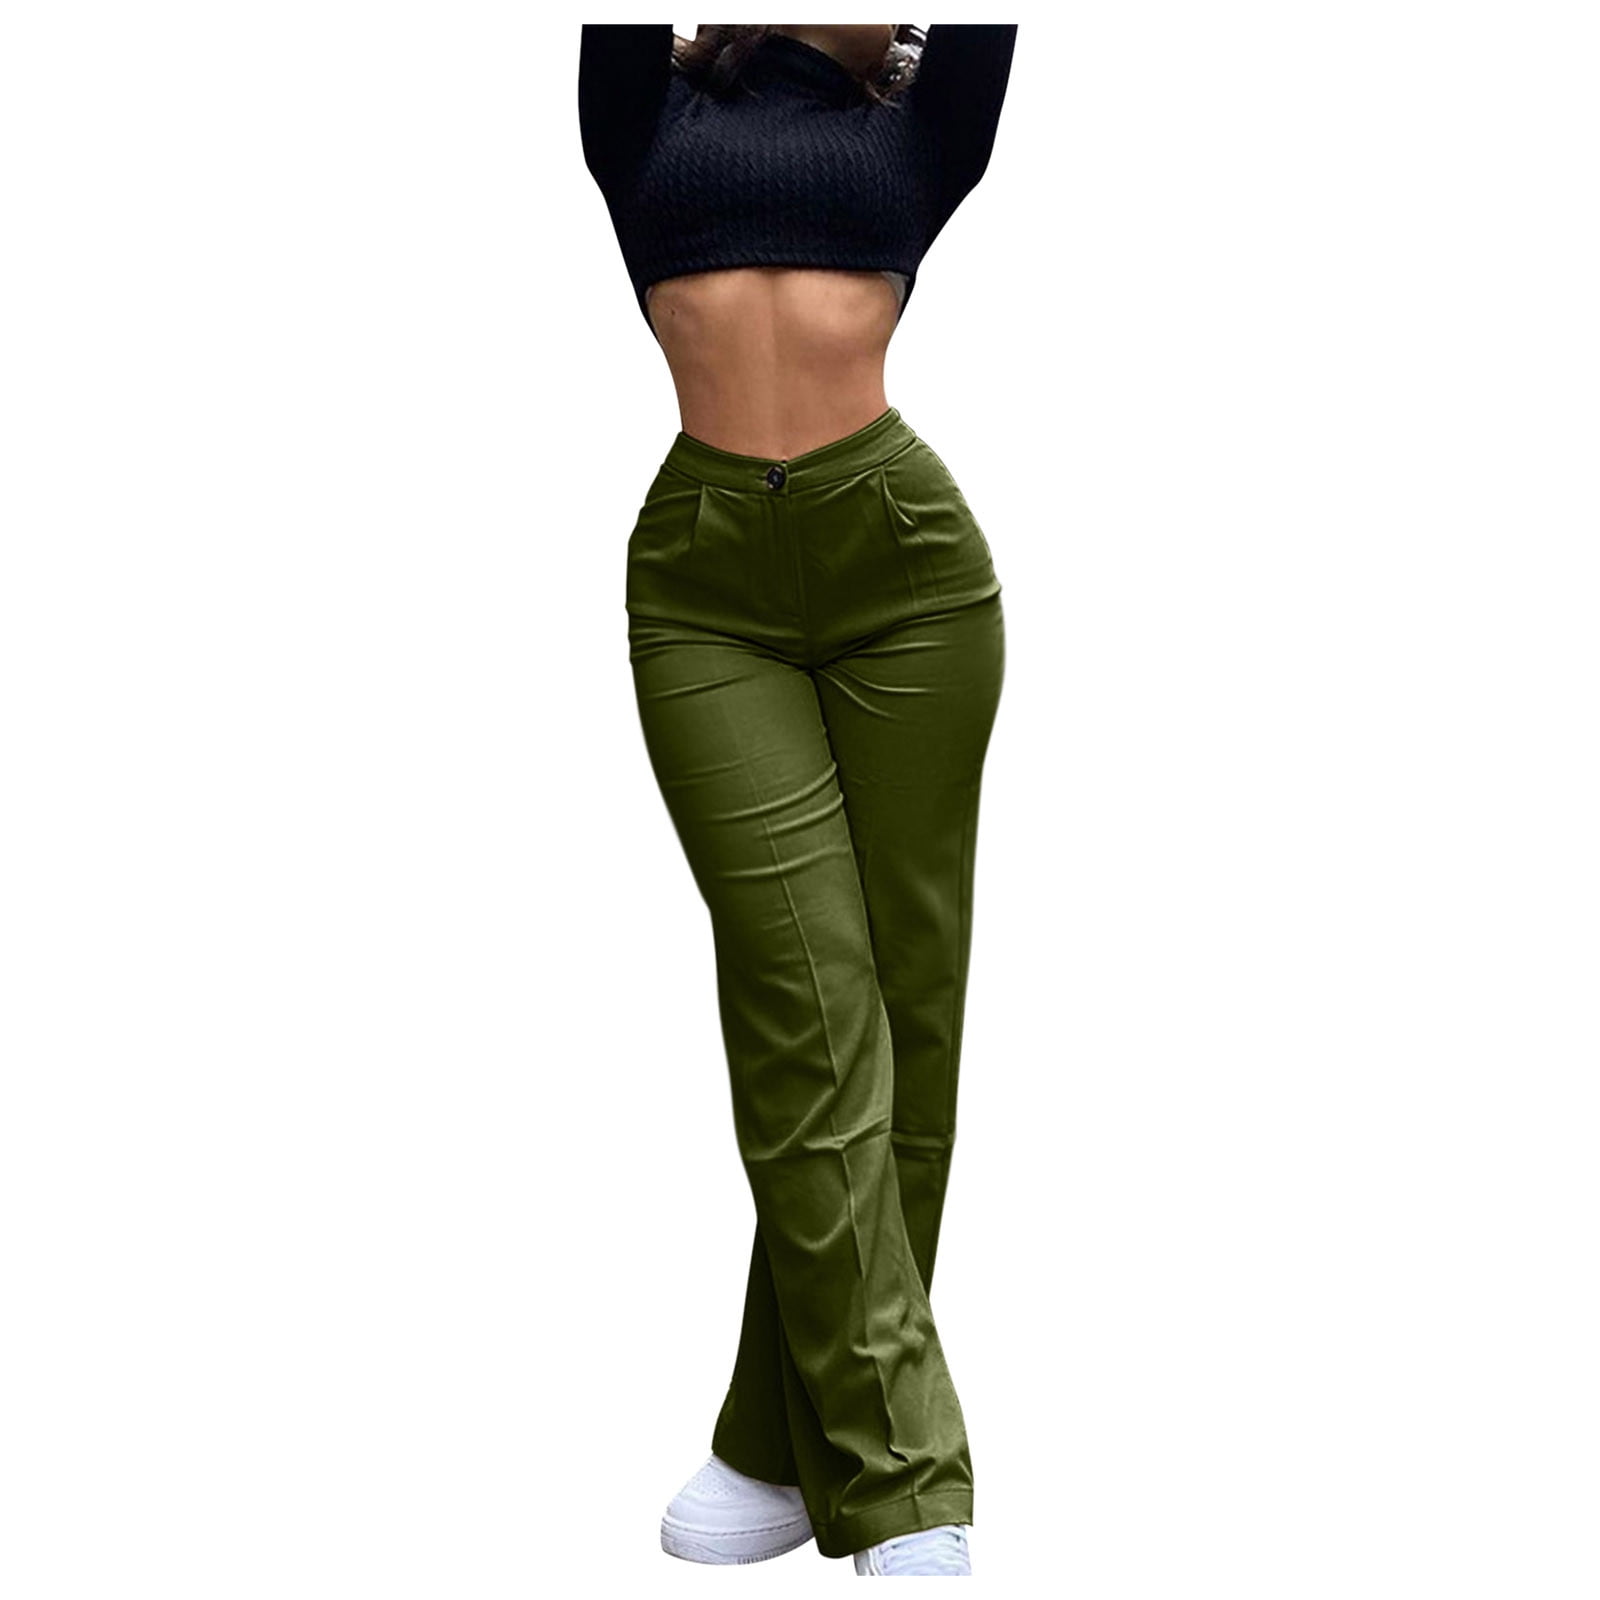 Conceited Dressy Leggings Business Casual Plus Size Work Pants For Women  High Waisted Pants For Women Slacks Womens Pants Dress